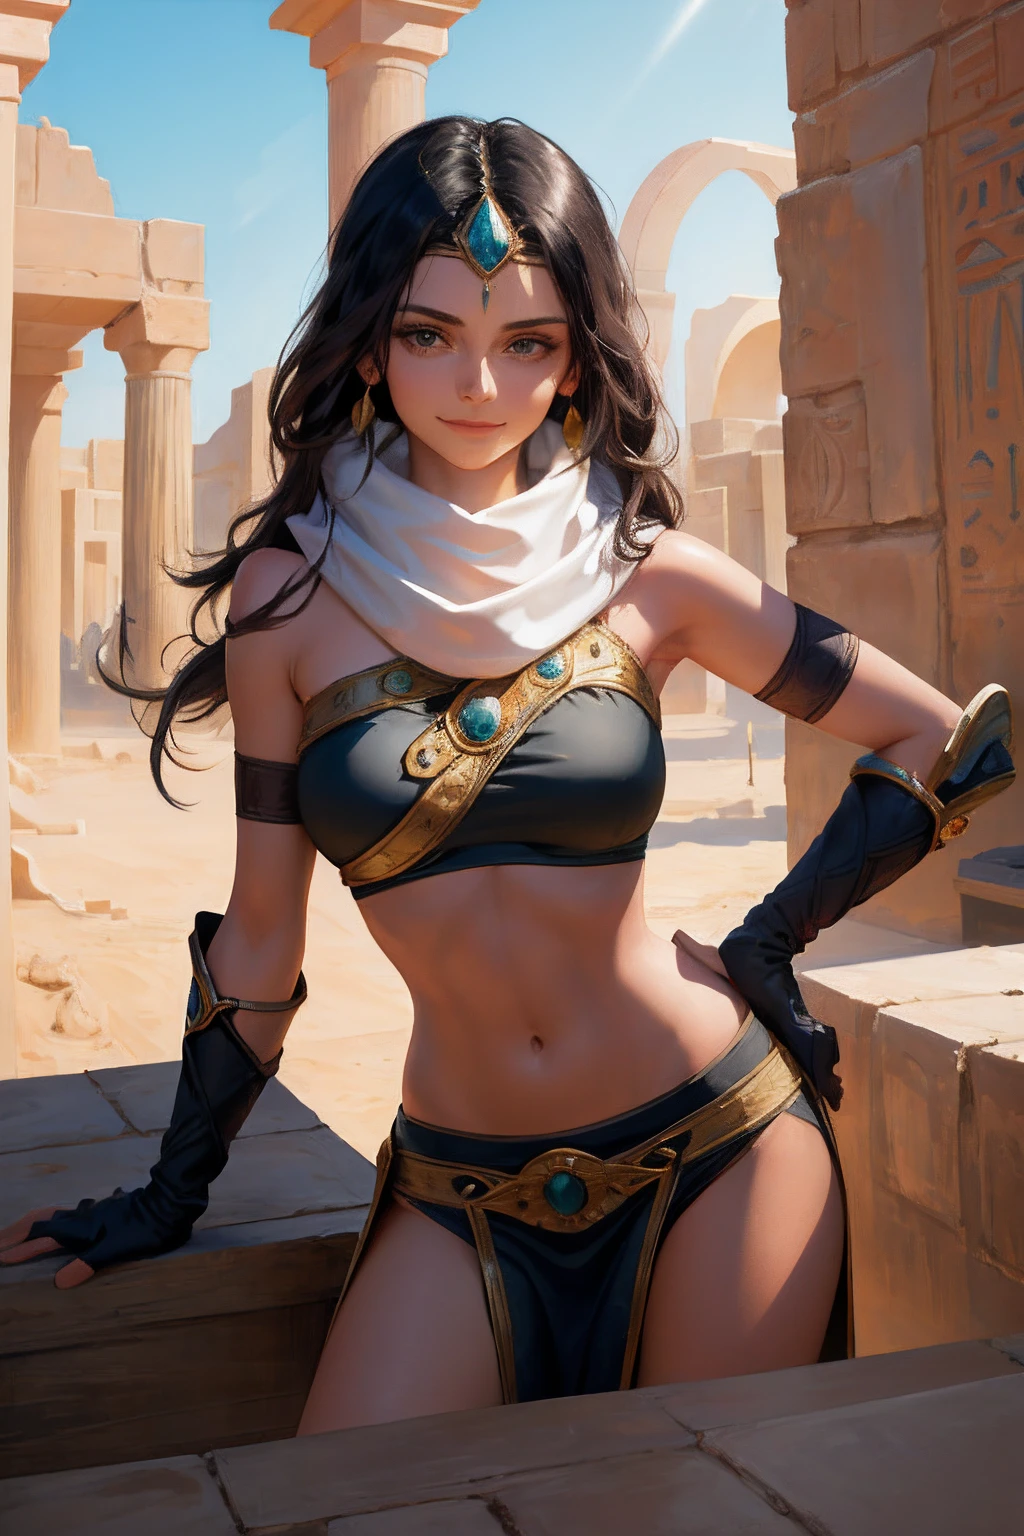 Masterpiece, Best quality, Sewell, circle of the crone, White scarf, Bandeau, mitts, Pelvic curtain, Upper body, Shiny skin, Large breasts, view the viewer, furrowed brows, Smile, Leaning forward, Desert, Egyptian architecture